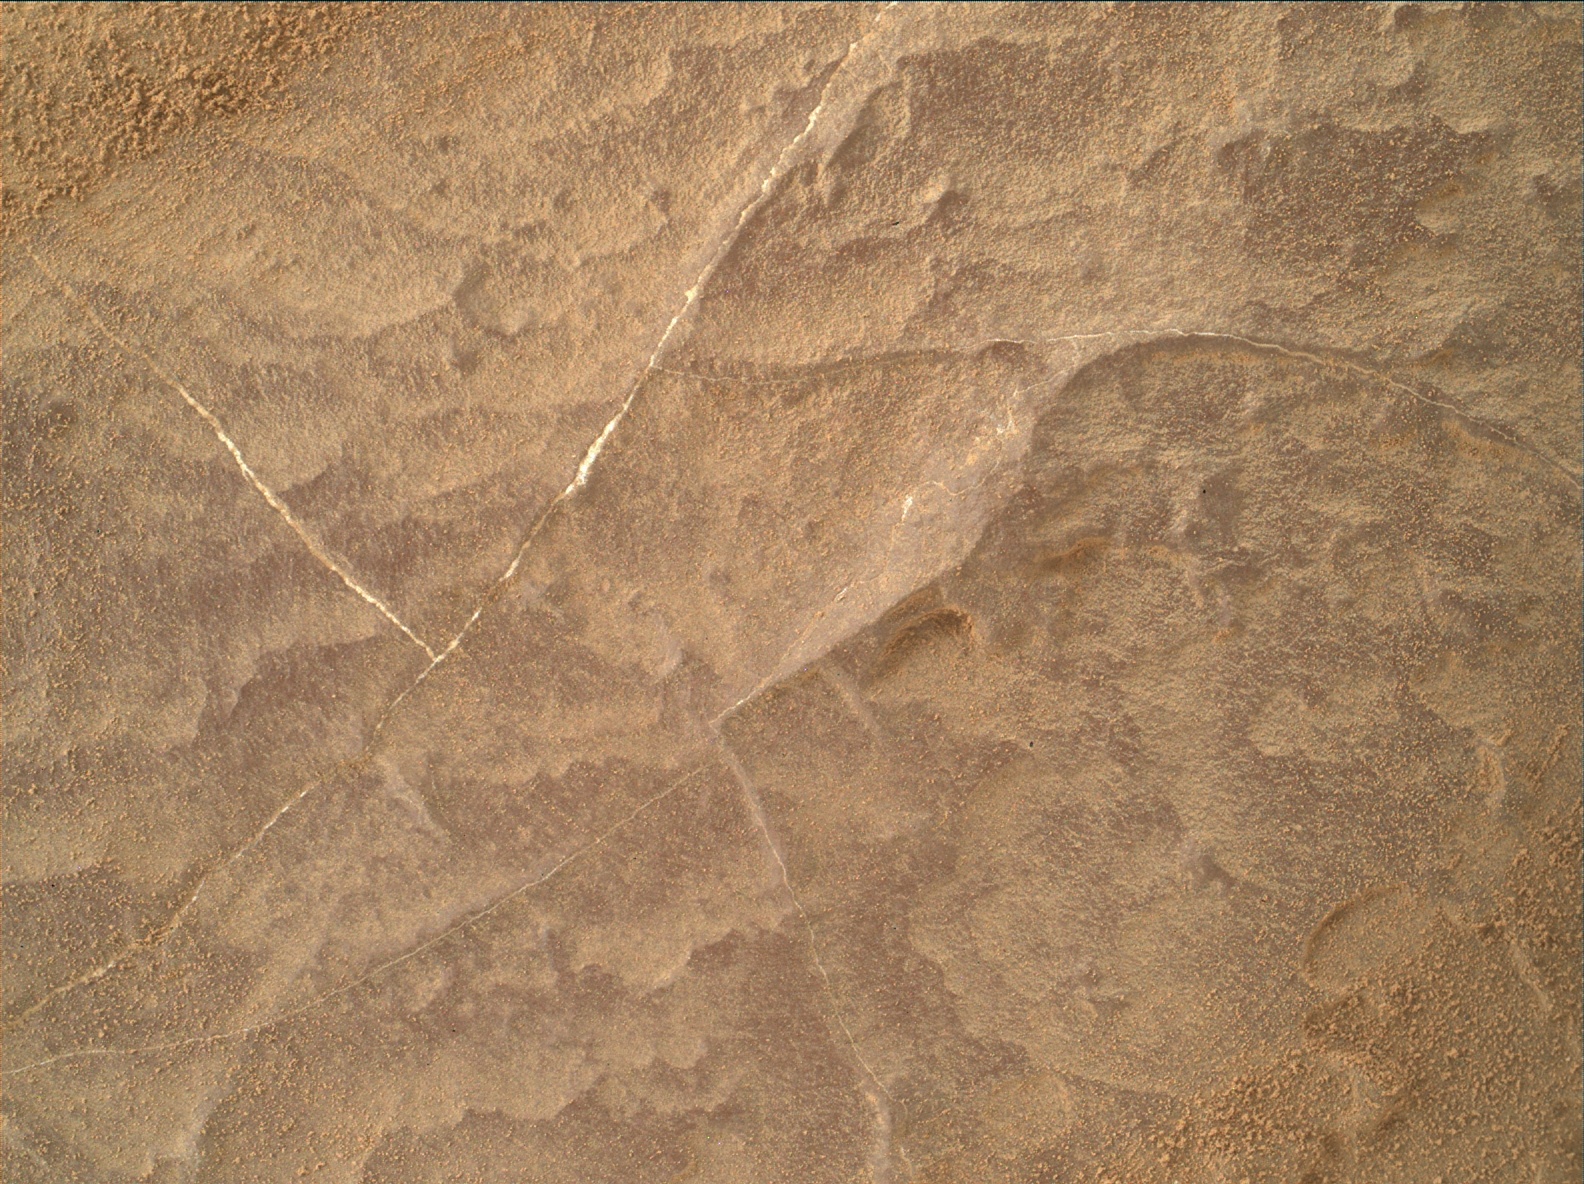 Nasa's Mars rover Curiosity acquired this image using its Mars Hand Lens Imager (MAHLI) on Sol 1871